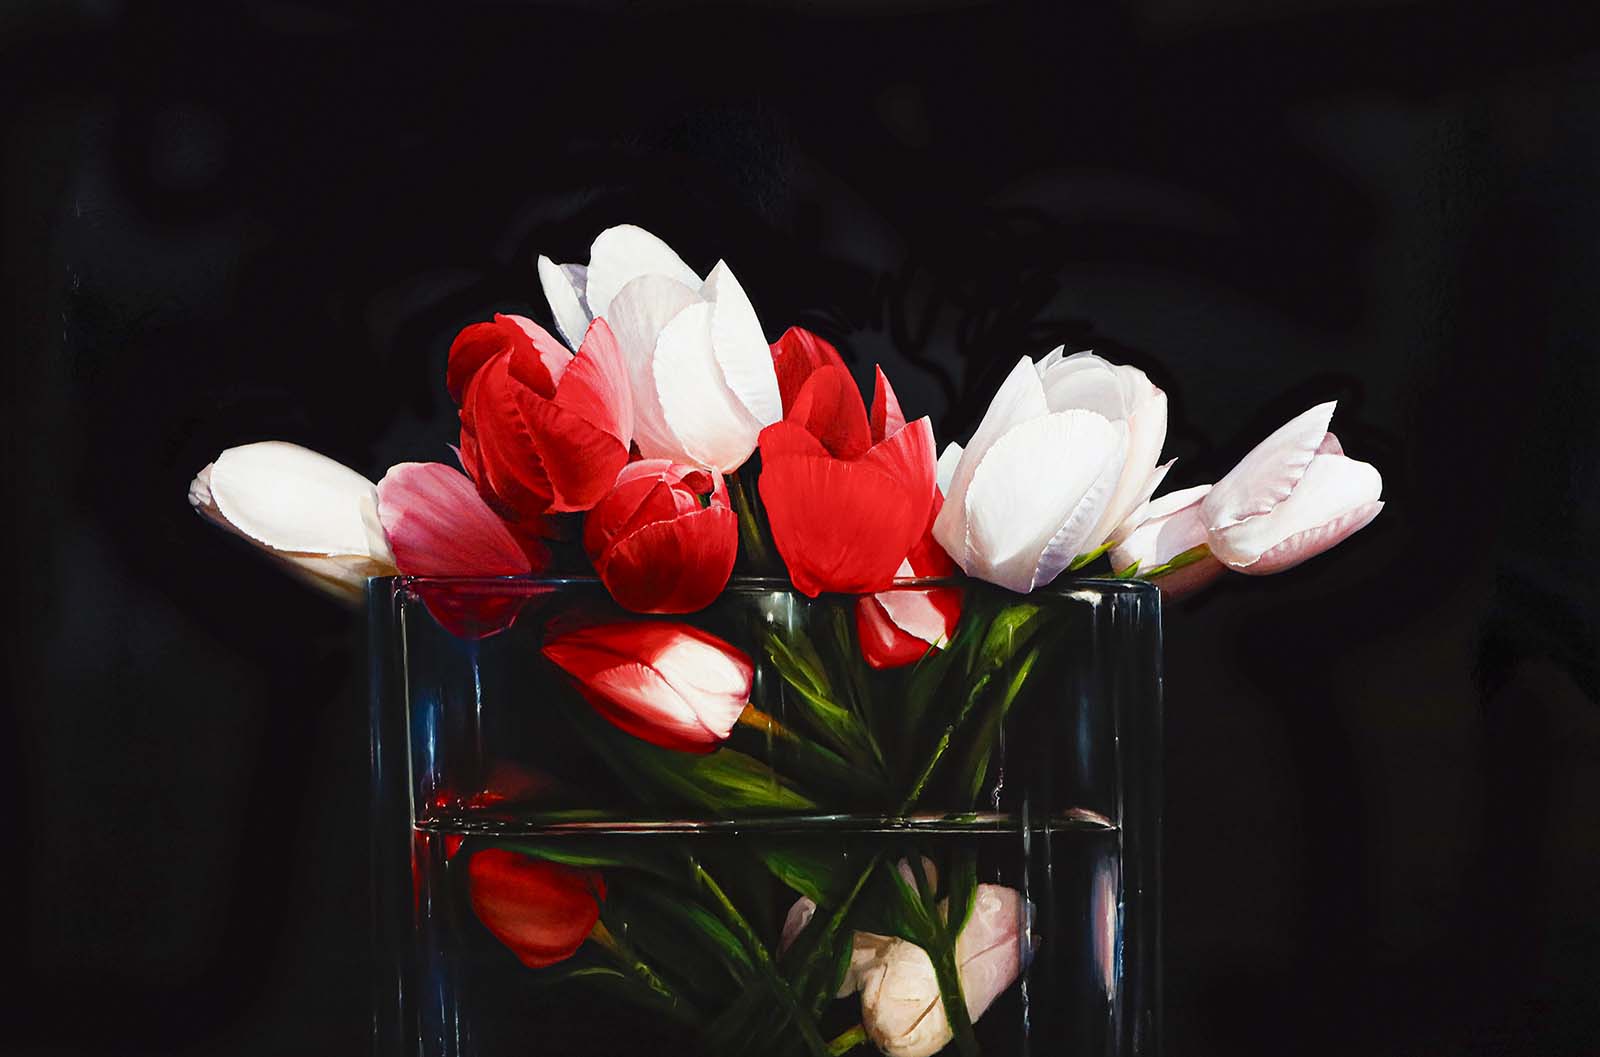 Contemporary art. Title: Tulips, Oil on Canvas, 40x60 inches by Canadian artist Alexander Sheversky.